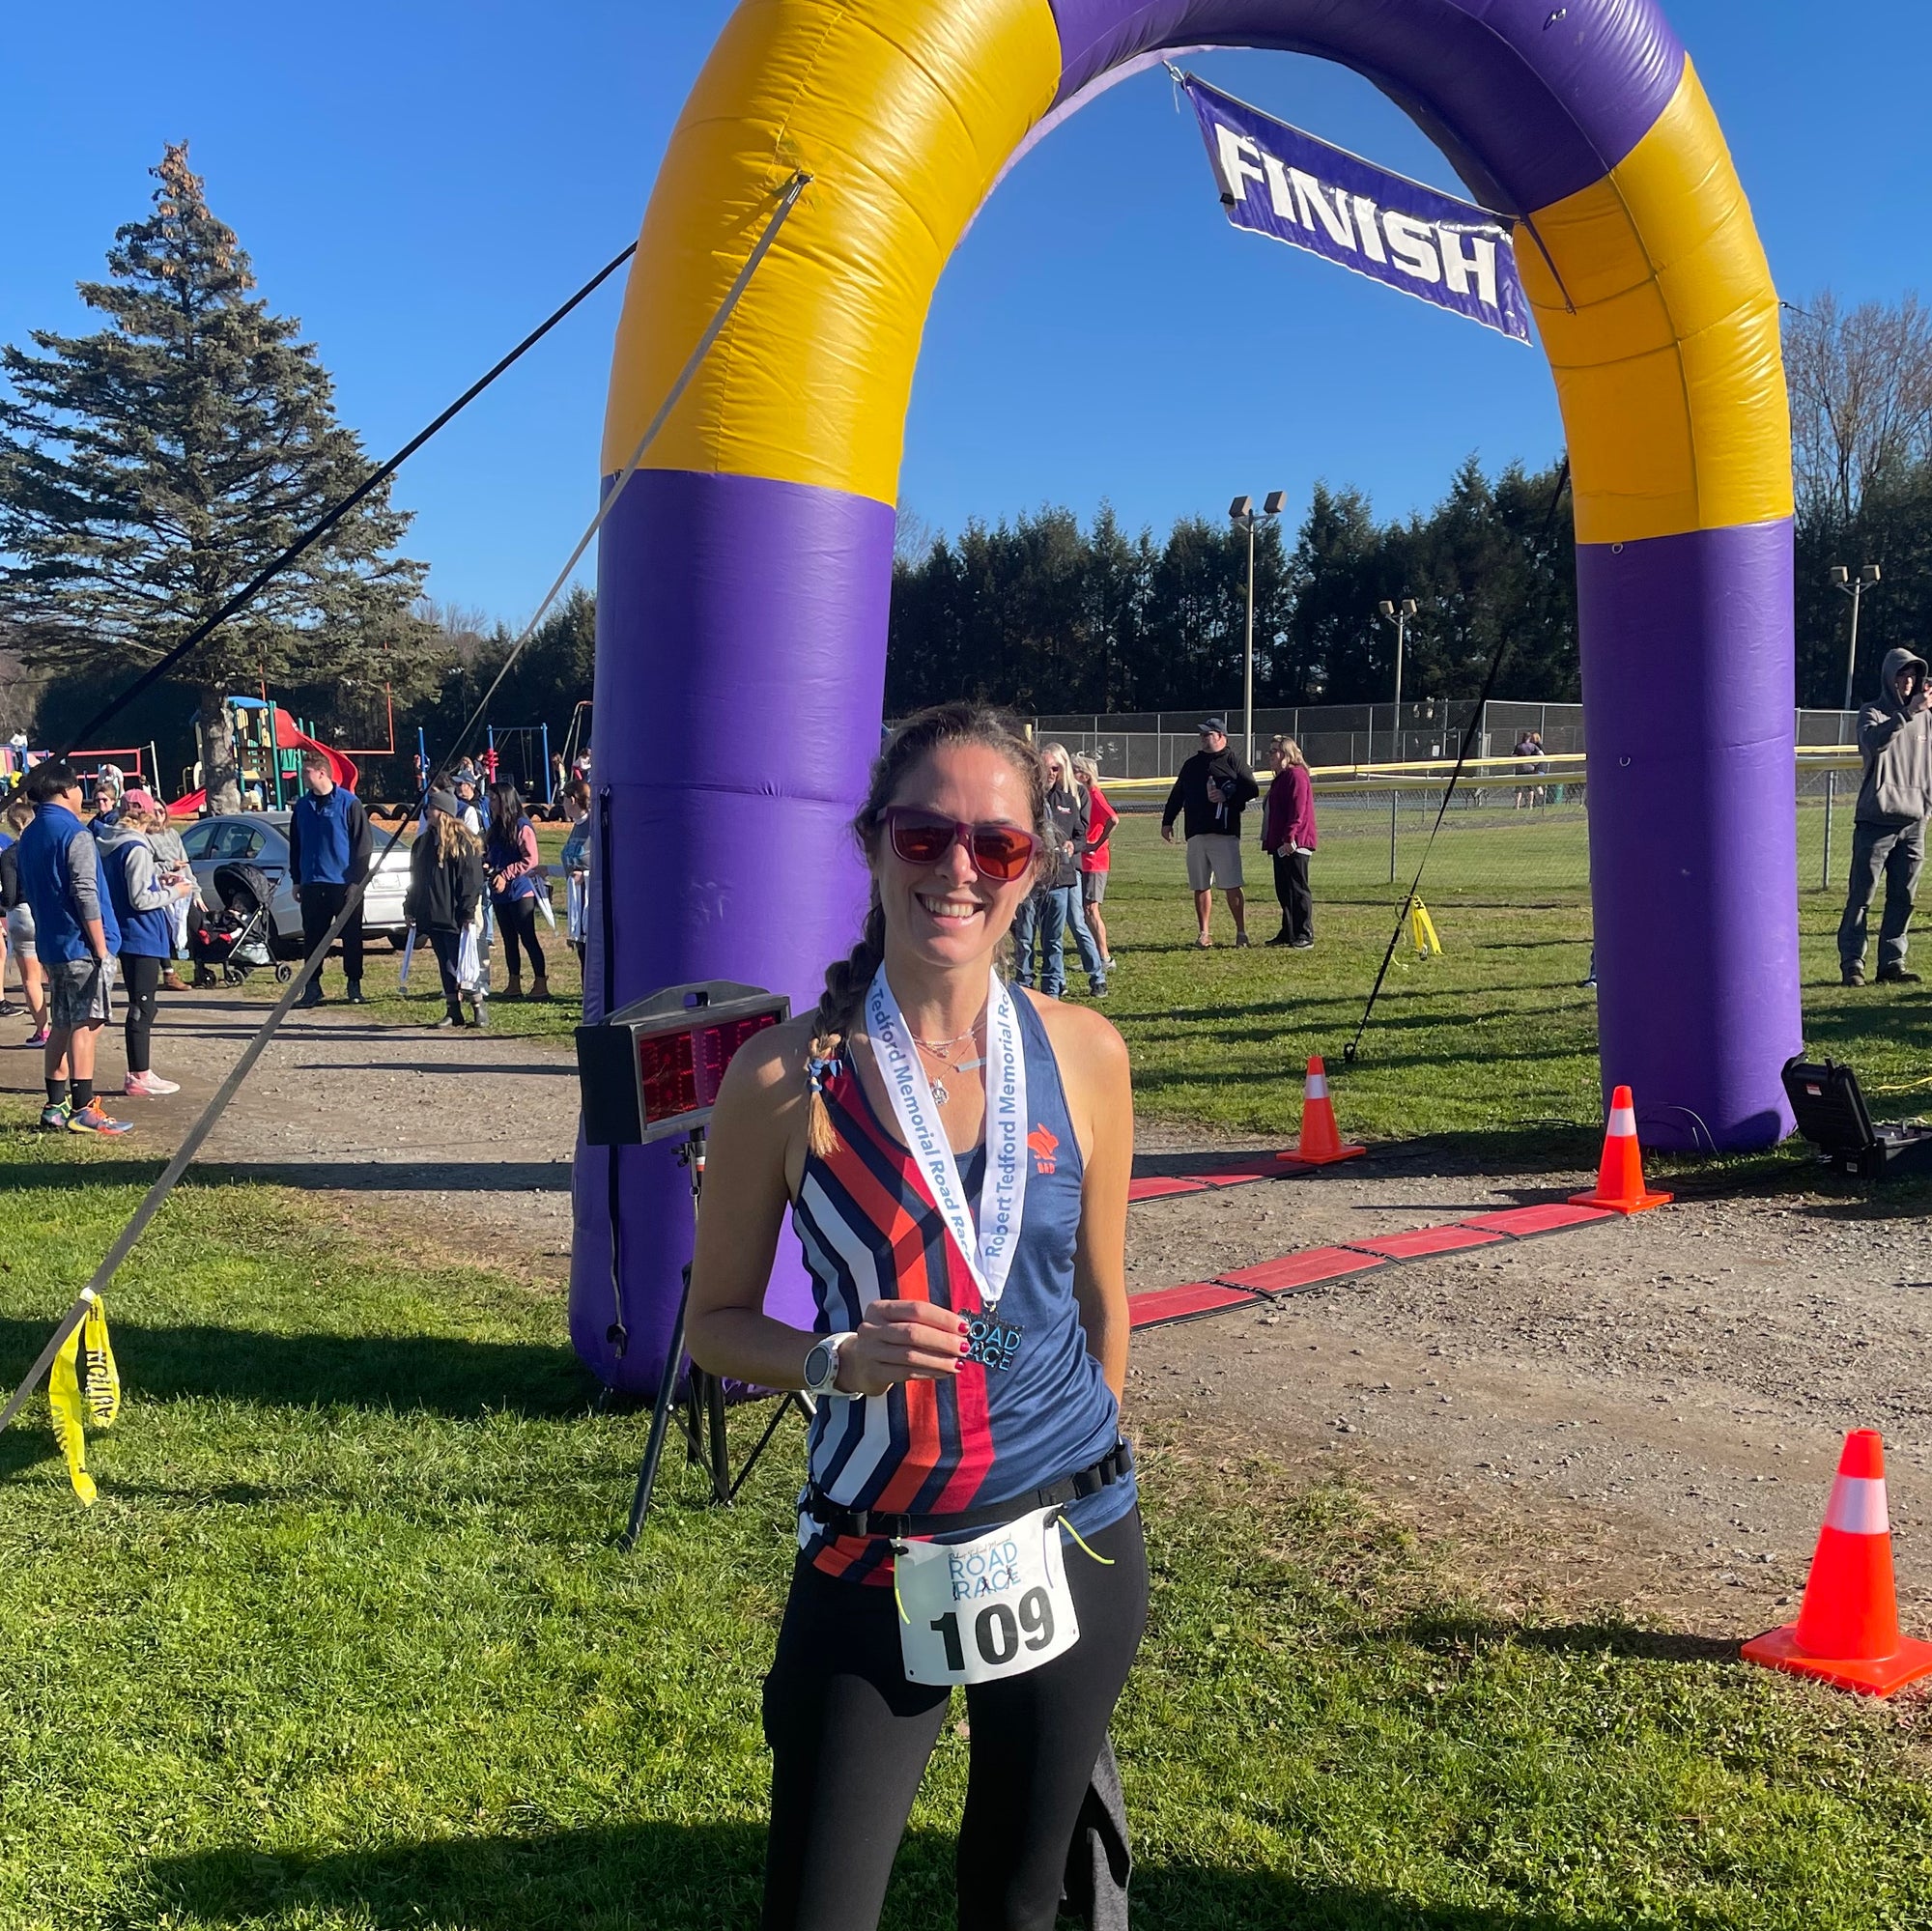 RADJournals: Stephanie McKenna found her way to competitive running, started Team Be Happy, and the Be Happy Road Race after losing her sister to cancer